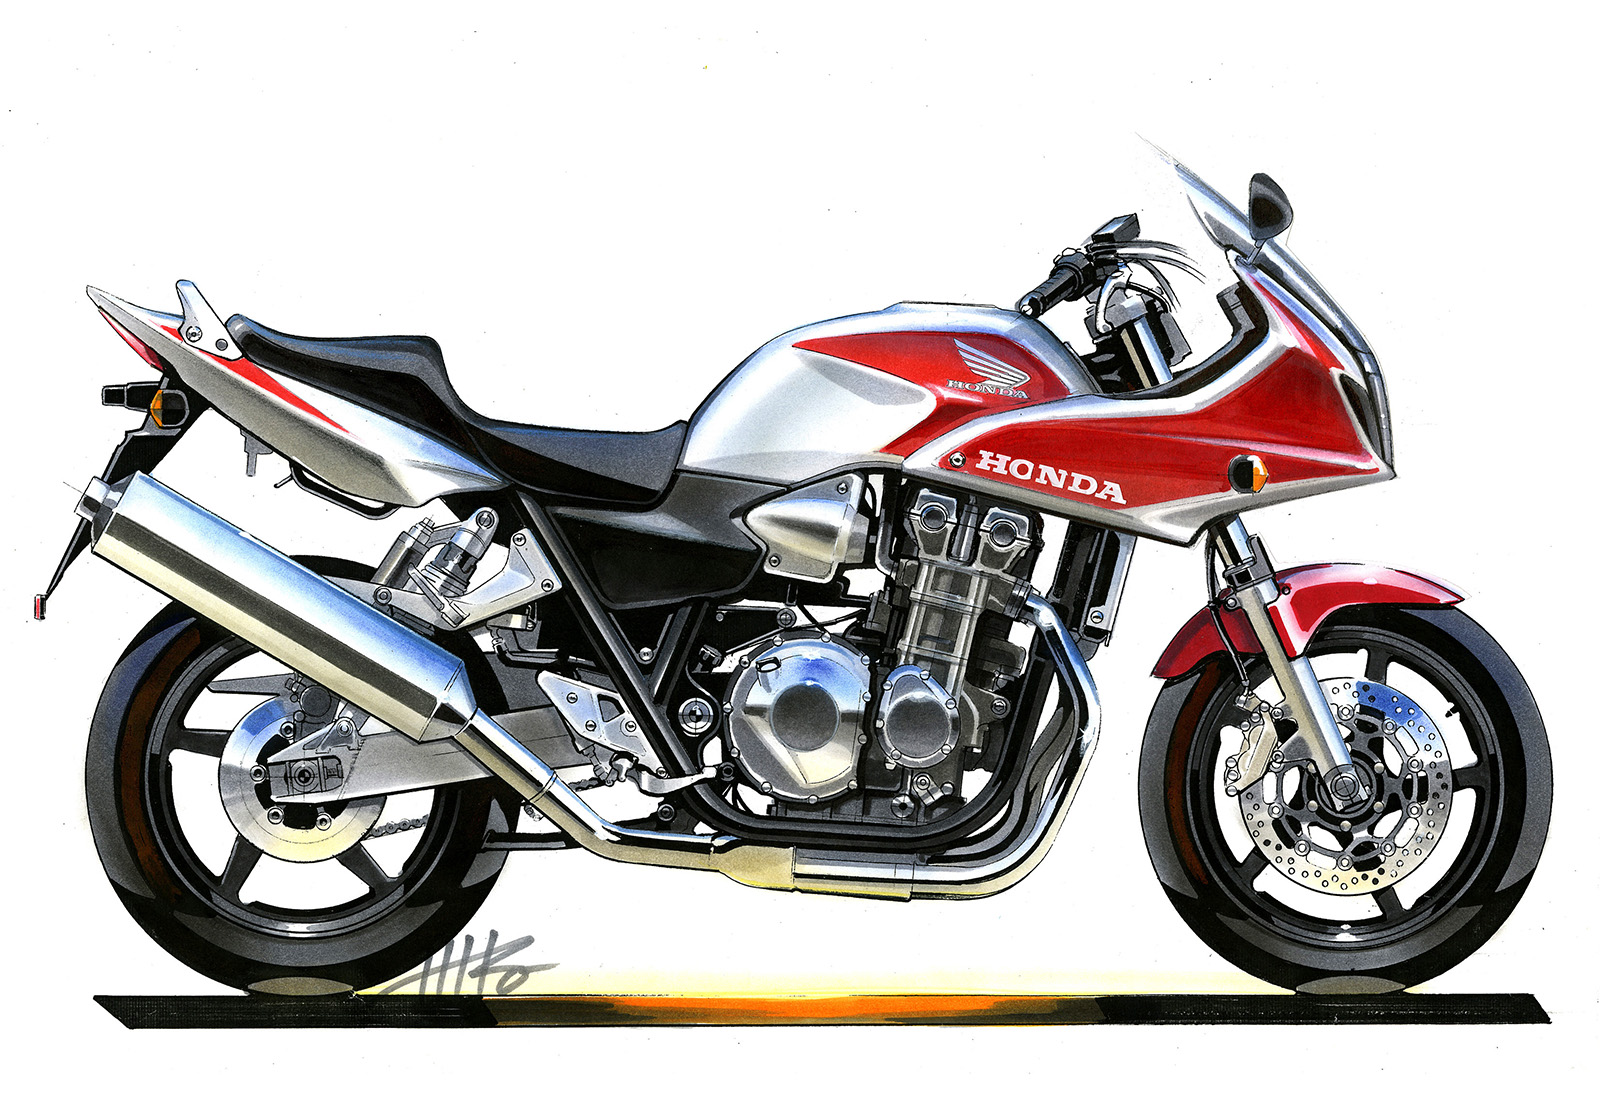 CB1300 SUPER BOL D'OR（2005年）ファイナルスケッチ